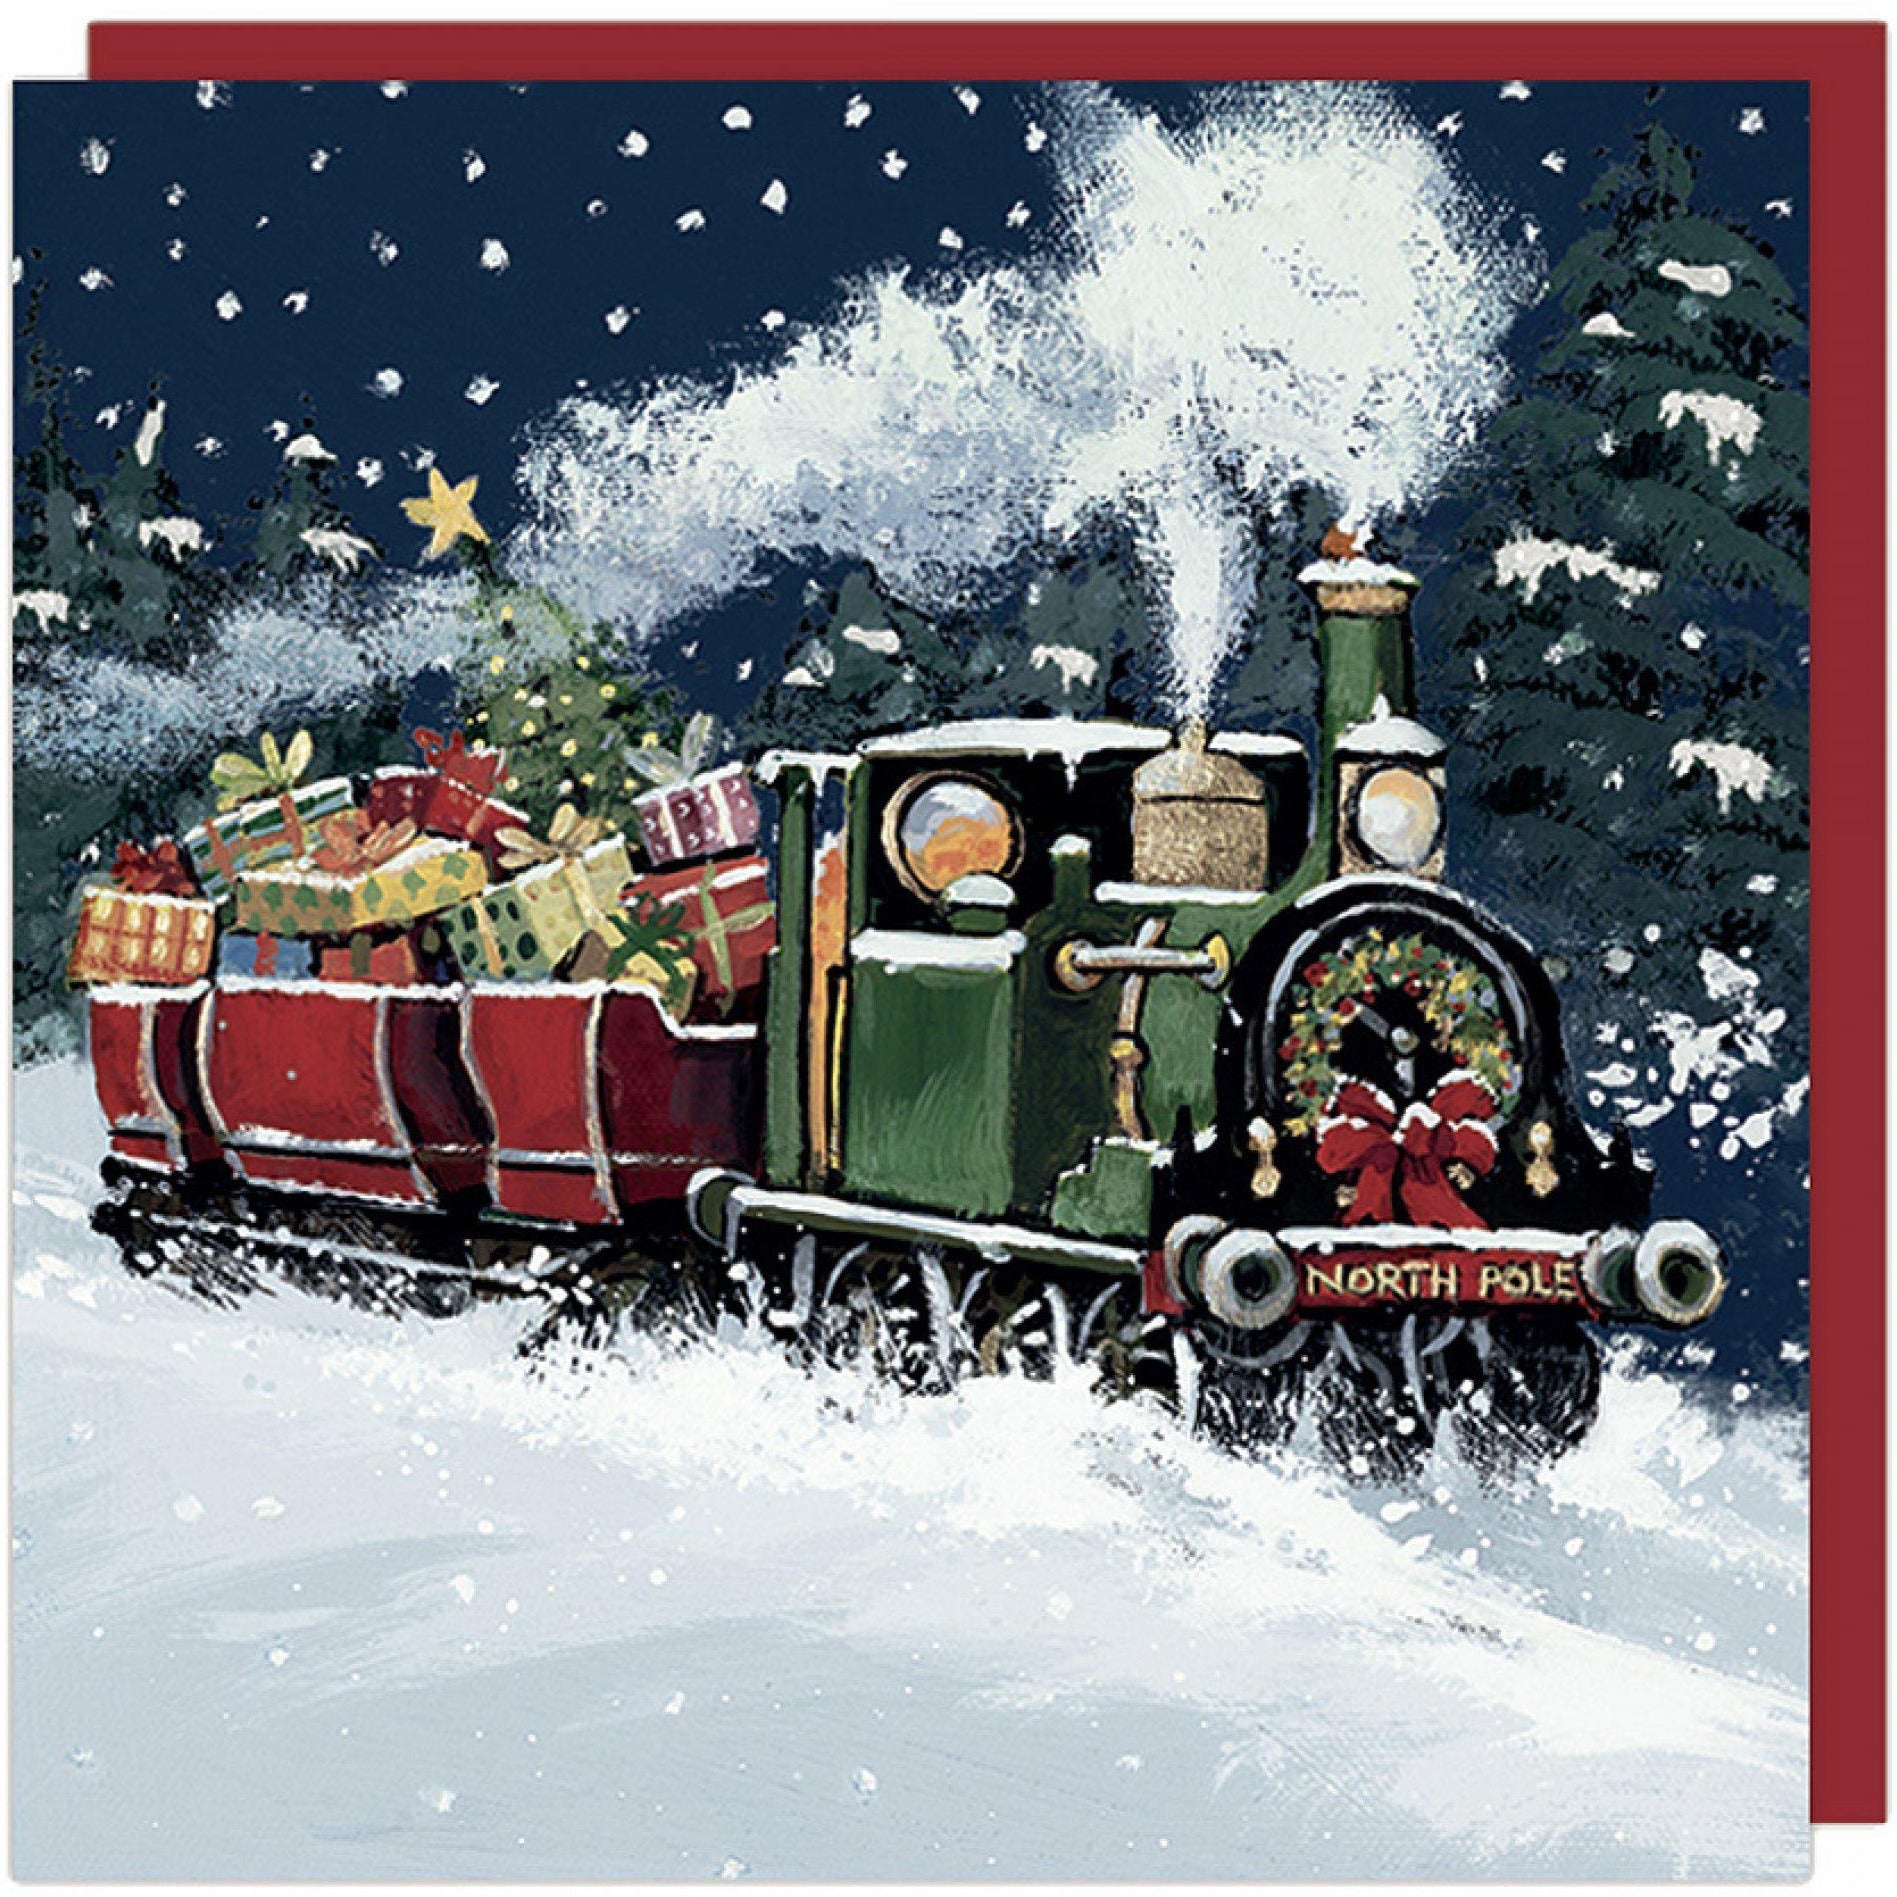 The Polar Express Christmas Cards - Pack of 6 - Duck Barn Interiors